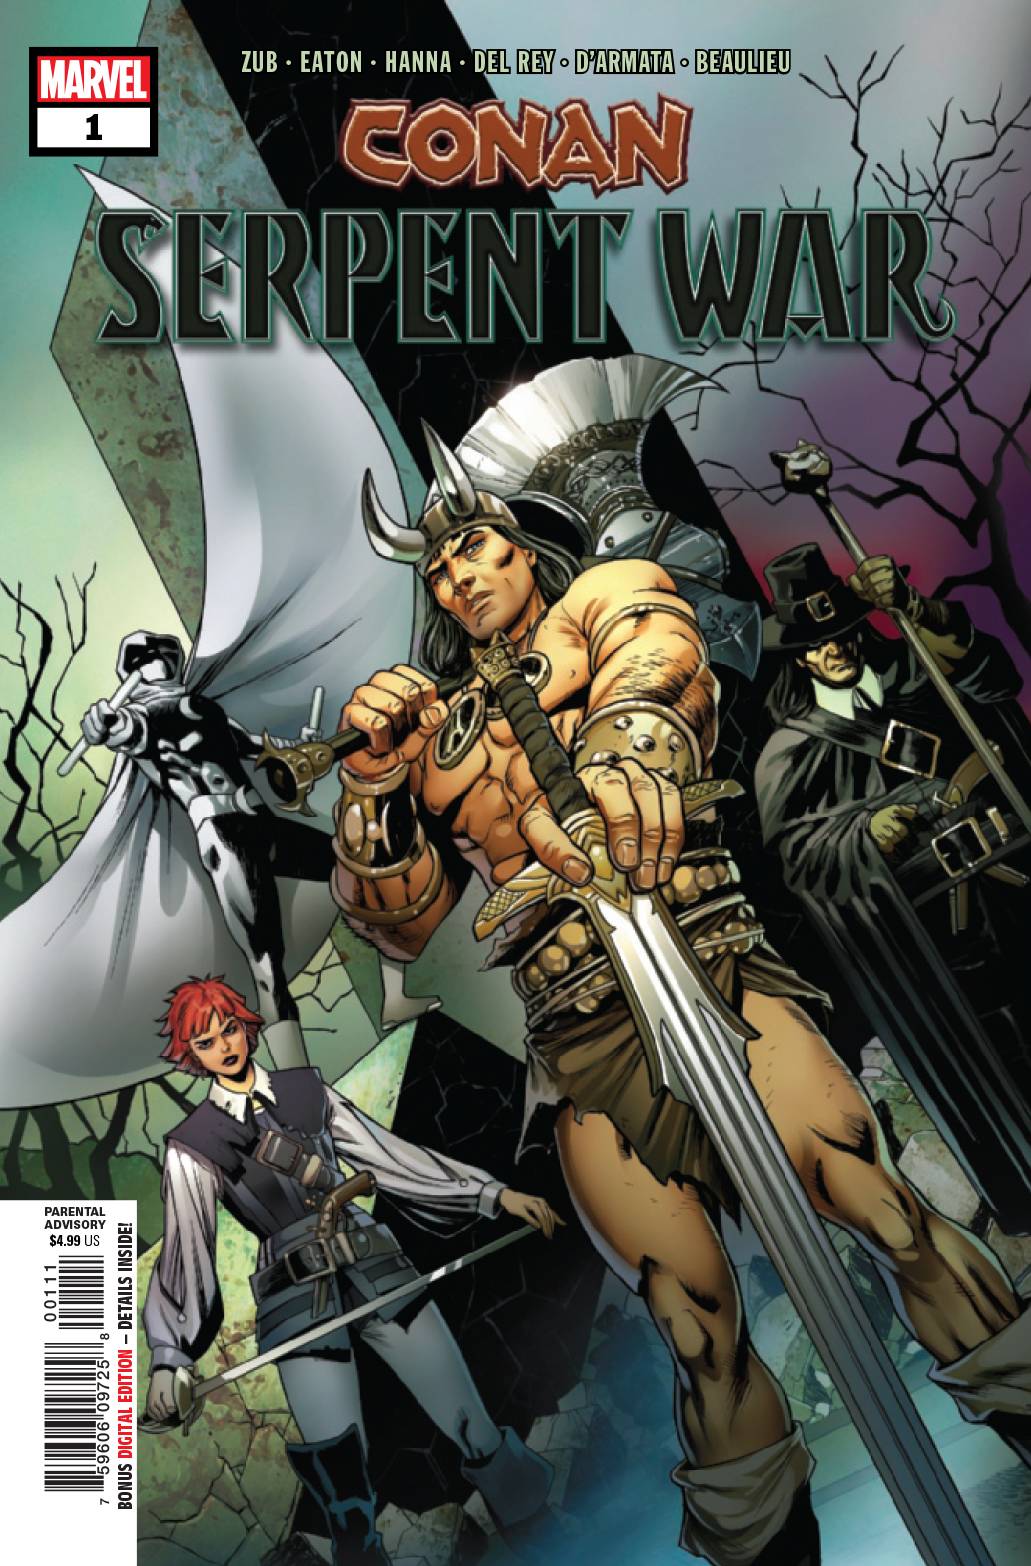 Photo of Conan Serpent War Issue 1 (of 4) comic sold by Stronghold Collectibles